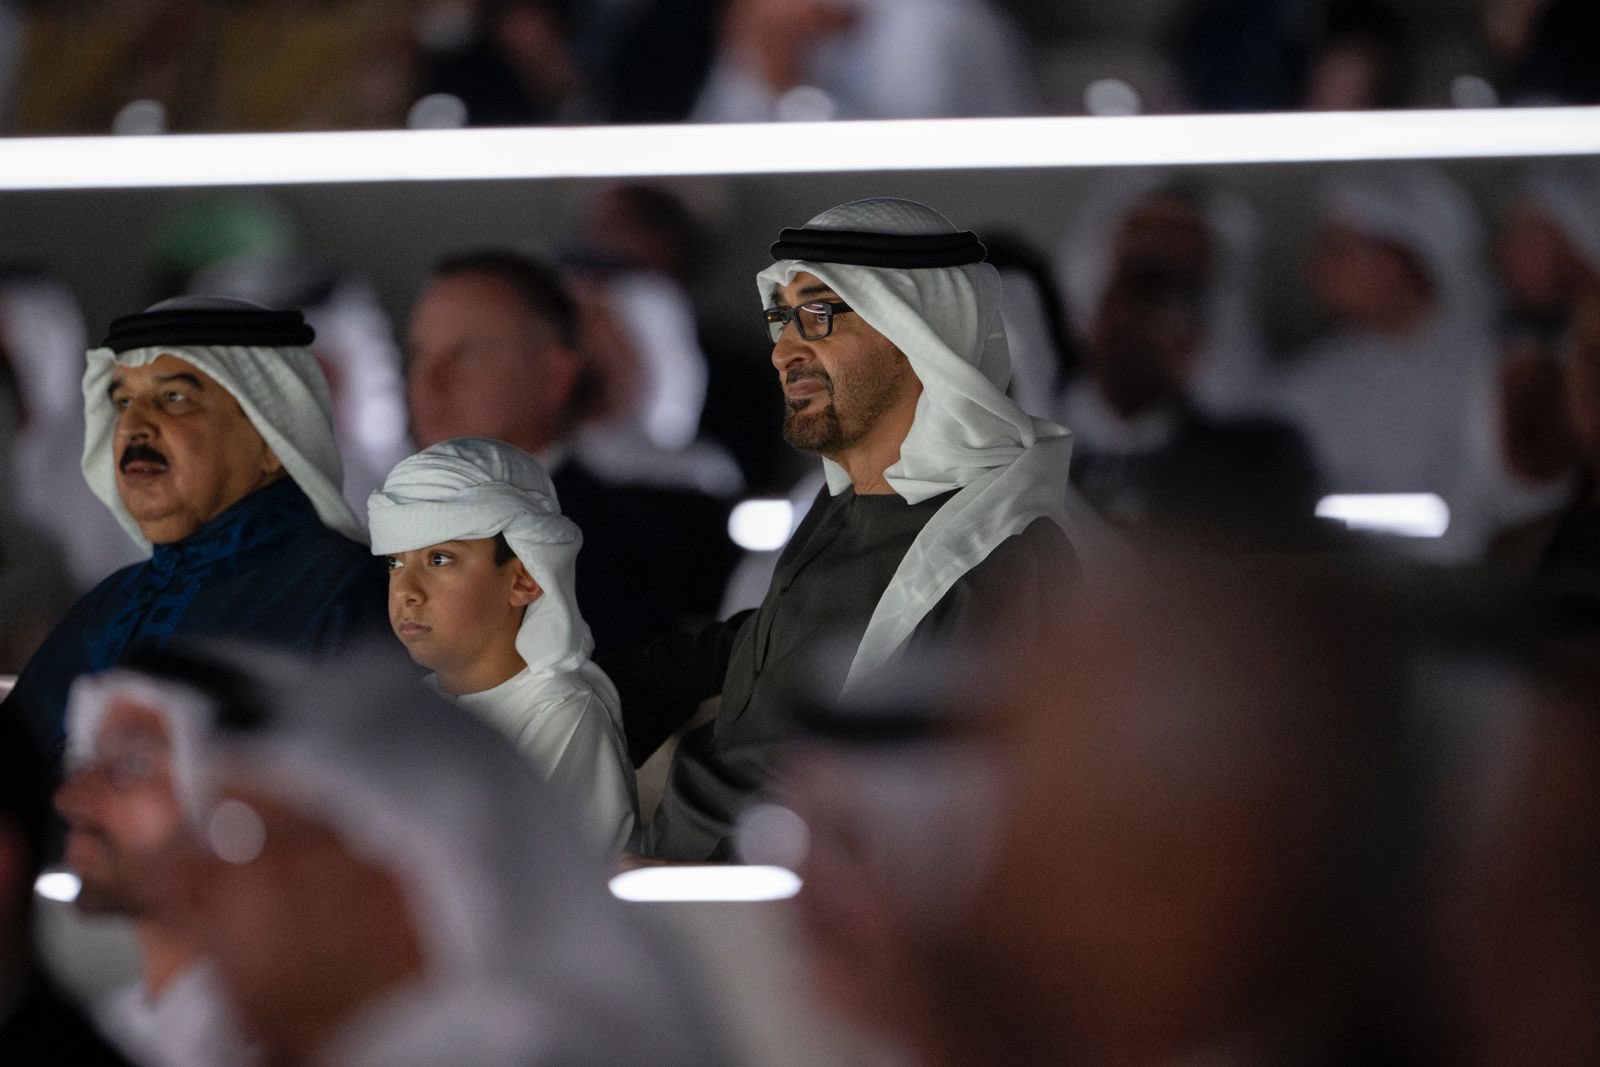 The official show of 52nd Union Day was held in the presence of UAE President Sheikh Mohammed bin Zayed Al Nahyan.